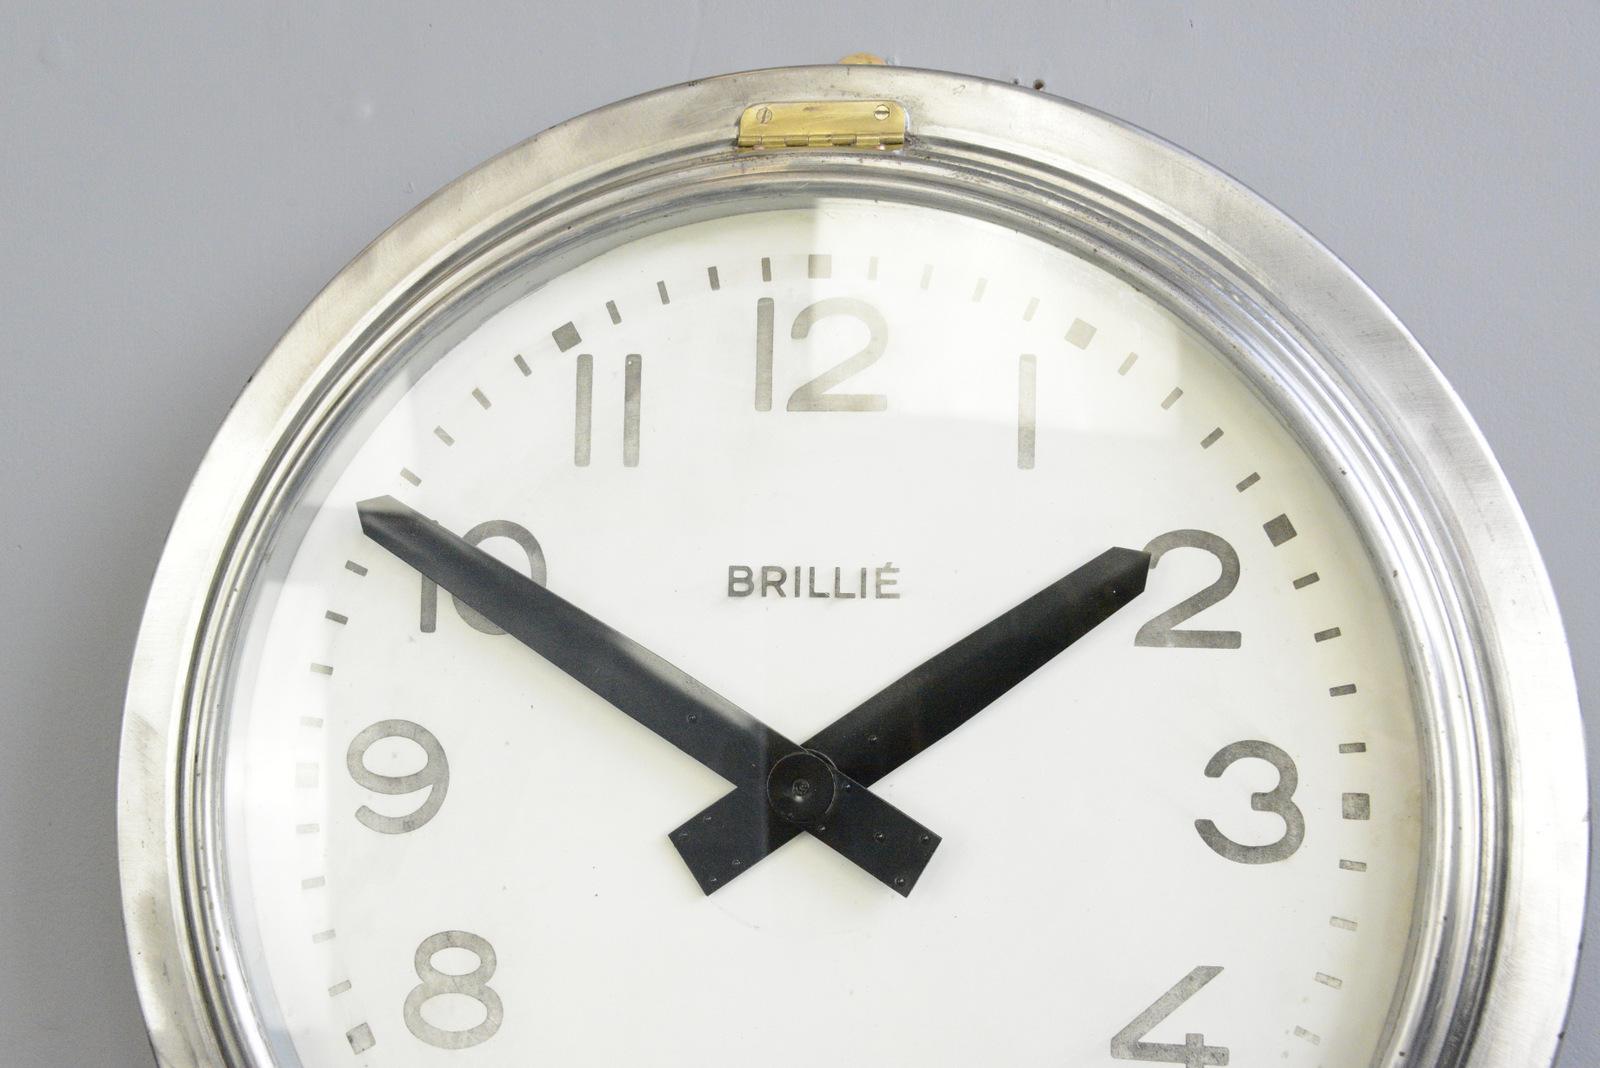 Large industrial wall clock by Brillie, circa 1930s

- Steel dial with glass face
- New AA battery powered quartz motor
- Steel casing
- Produced by Brillie
- French, 1930s
- Measures: 62cm wide x 13cm deep

Condition report

Fully